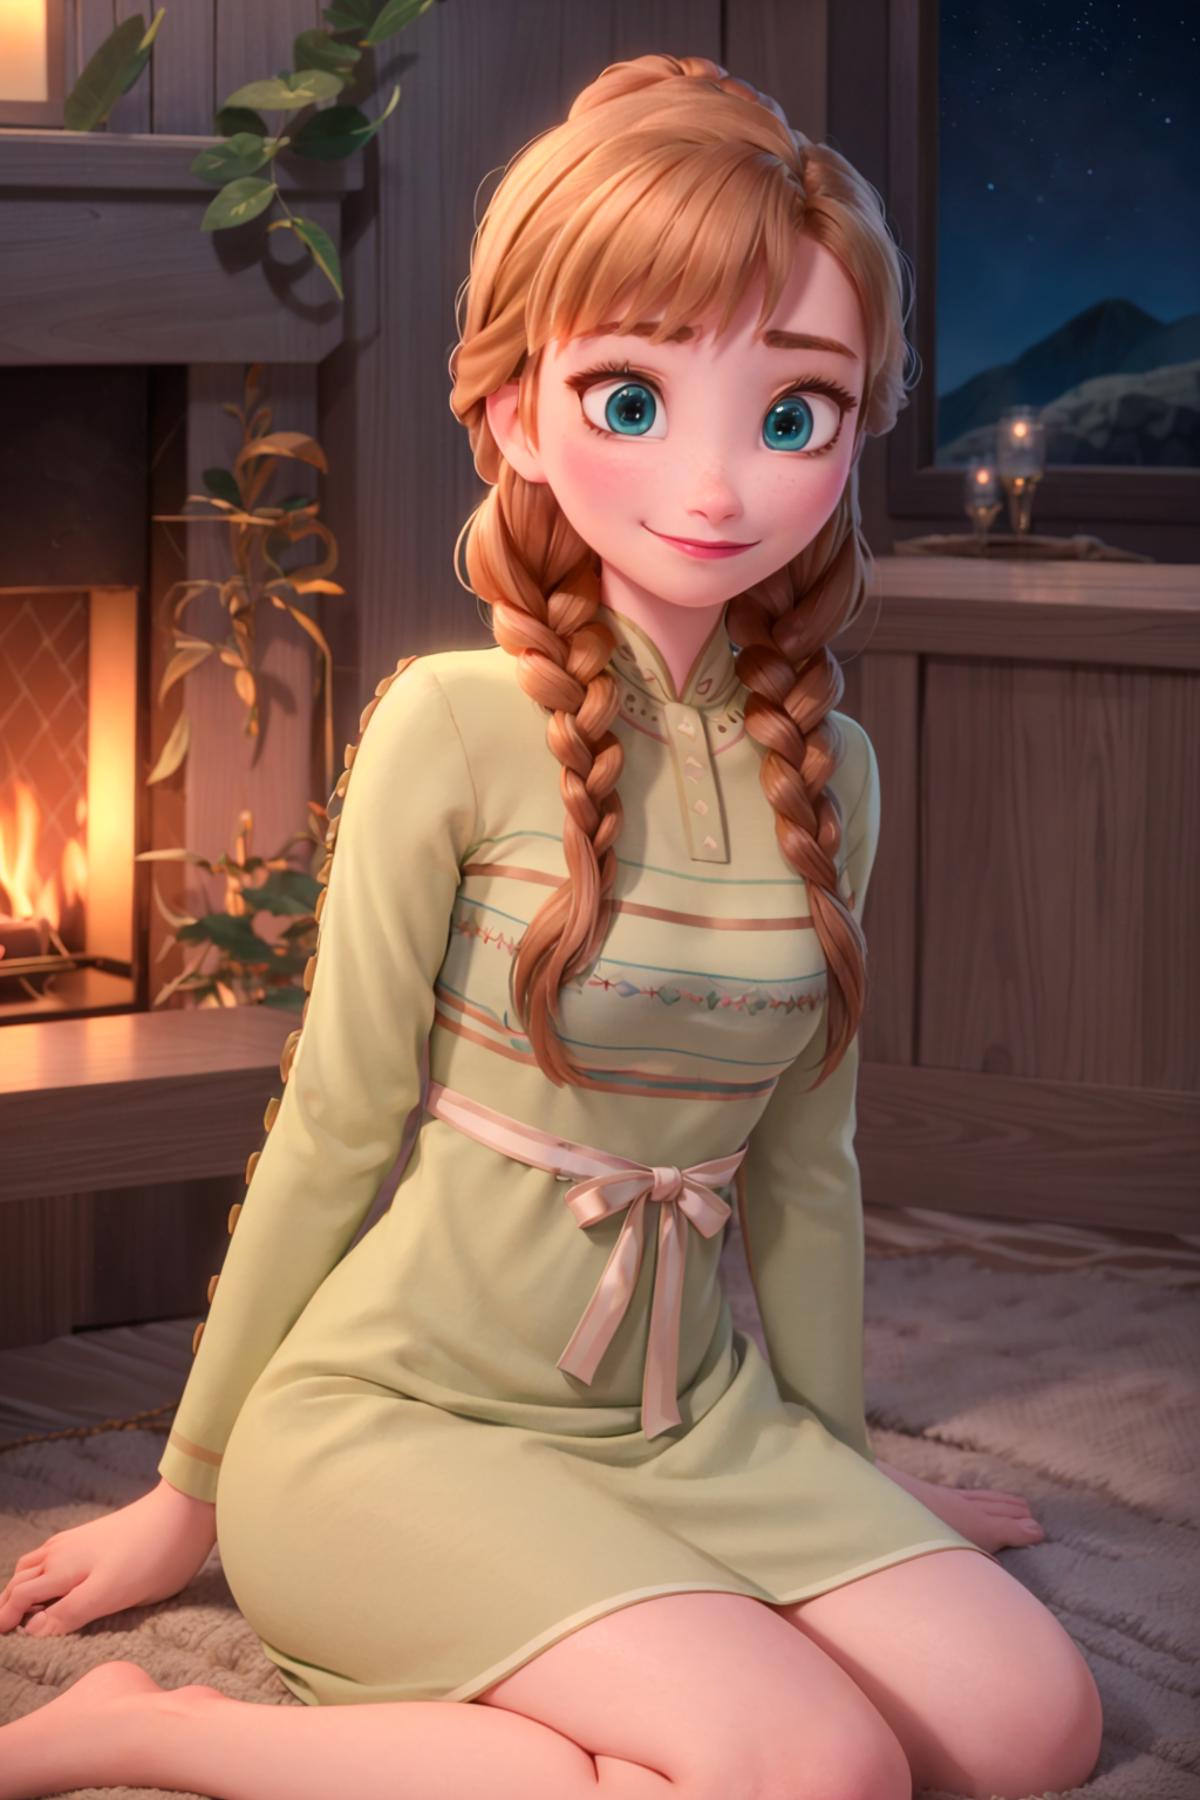 Frozen - Anna image by chrgg